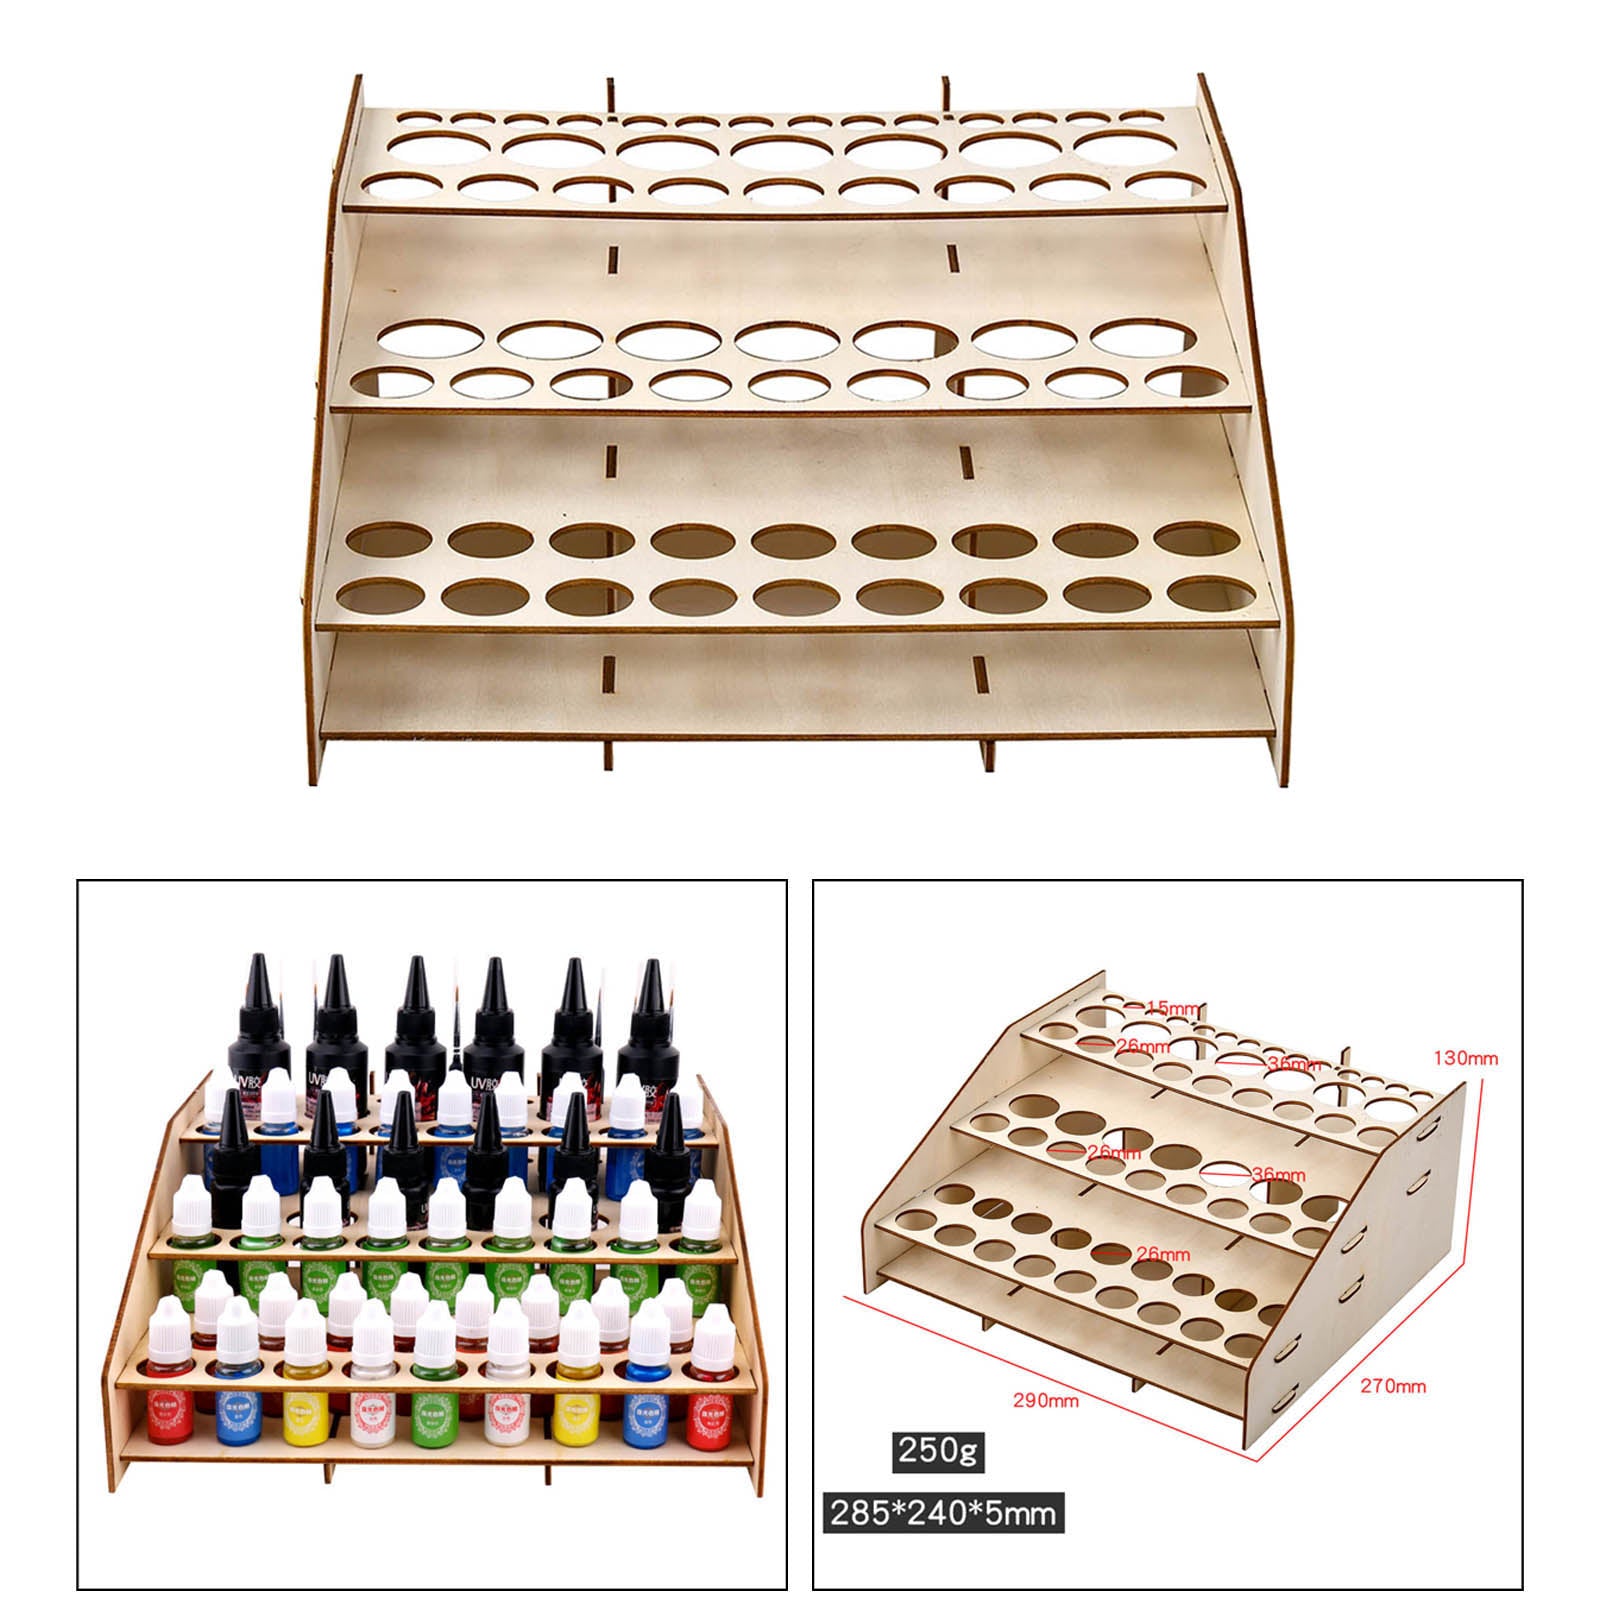 80 HOLES BOTTLE PAINT RACK STORAGE WOODEN HOBBY ORGANIZER WITH